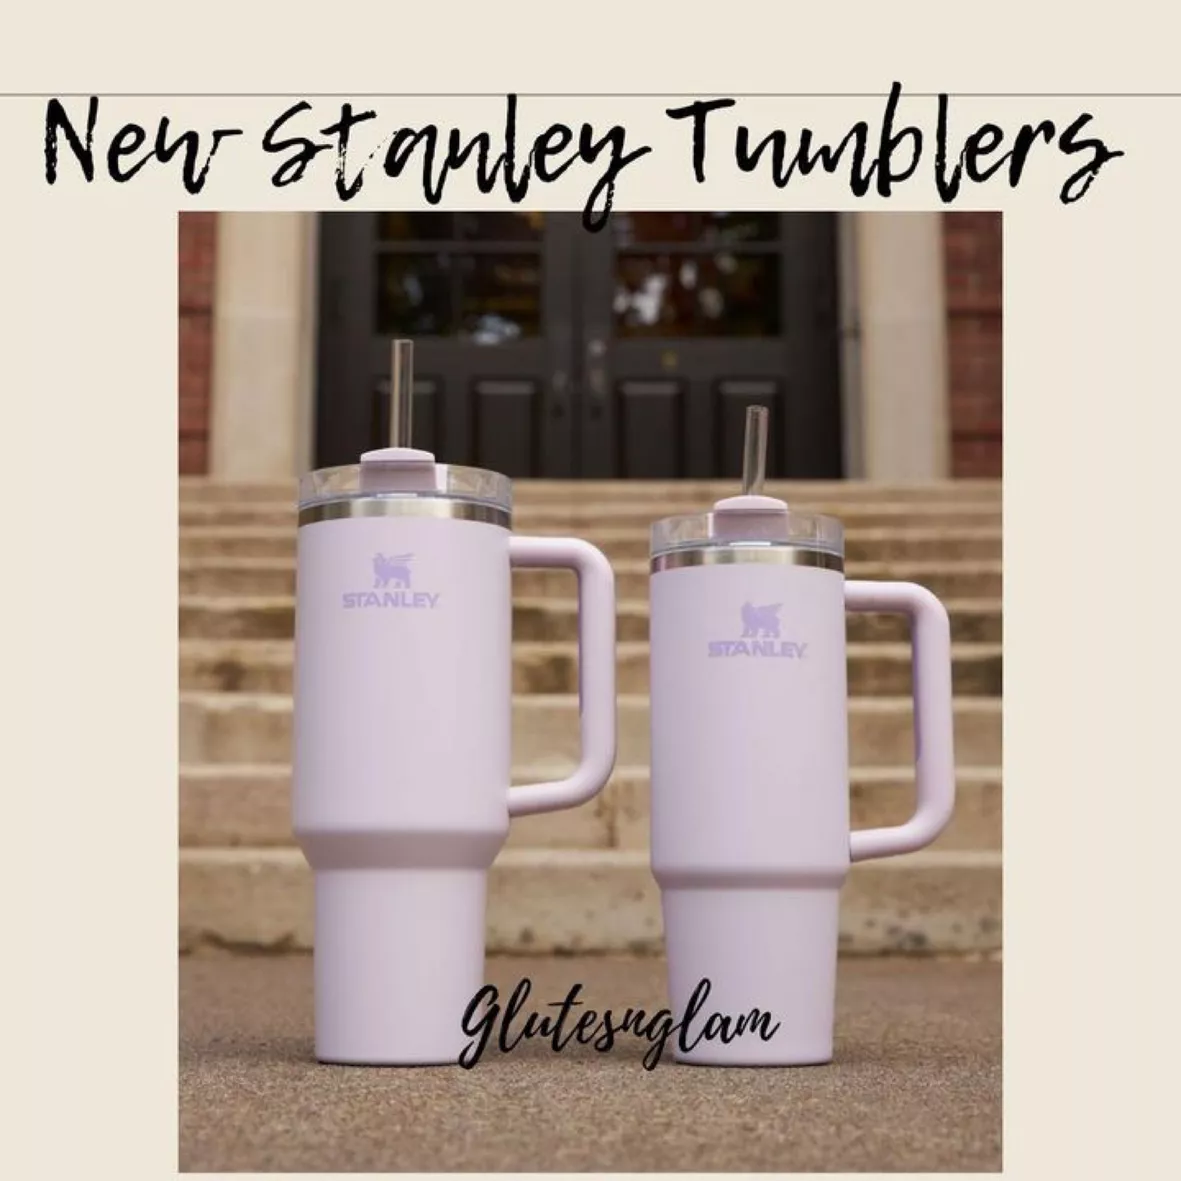 The Stanley Tumbler is back with new color